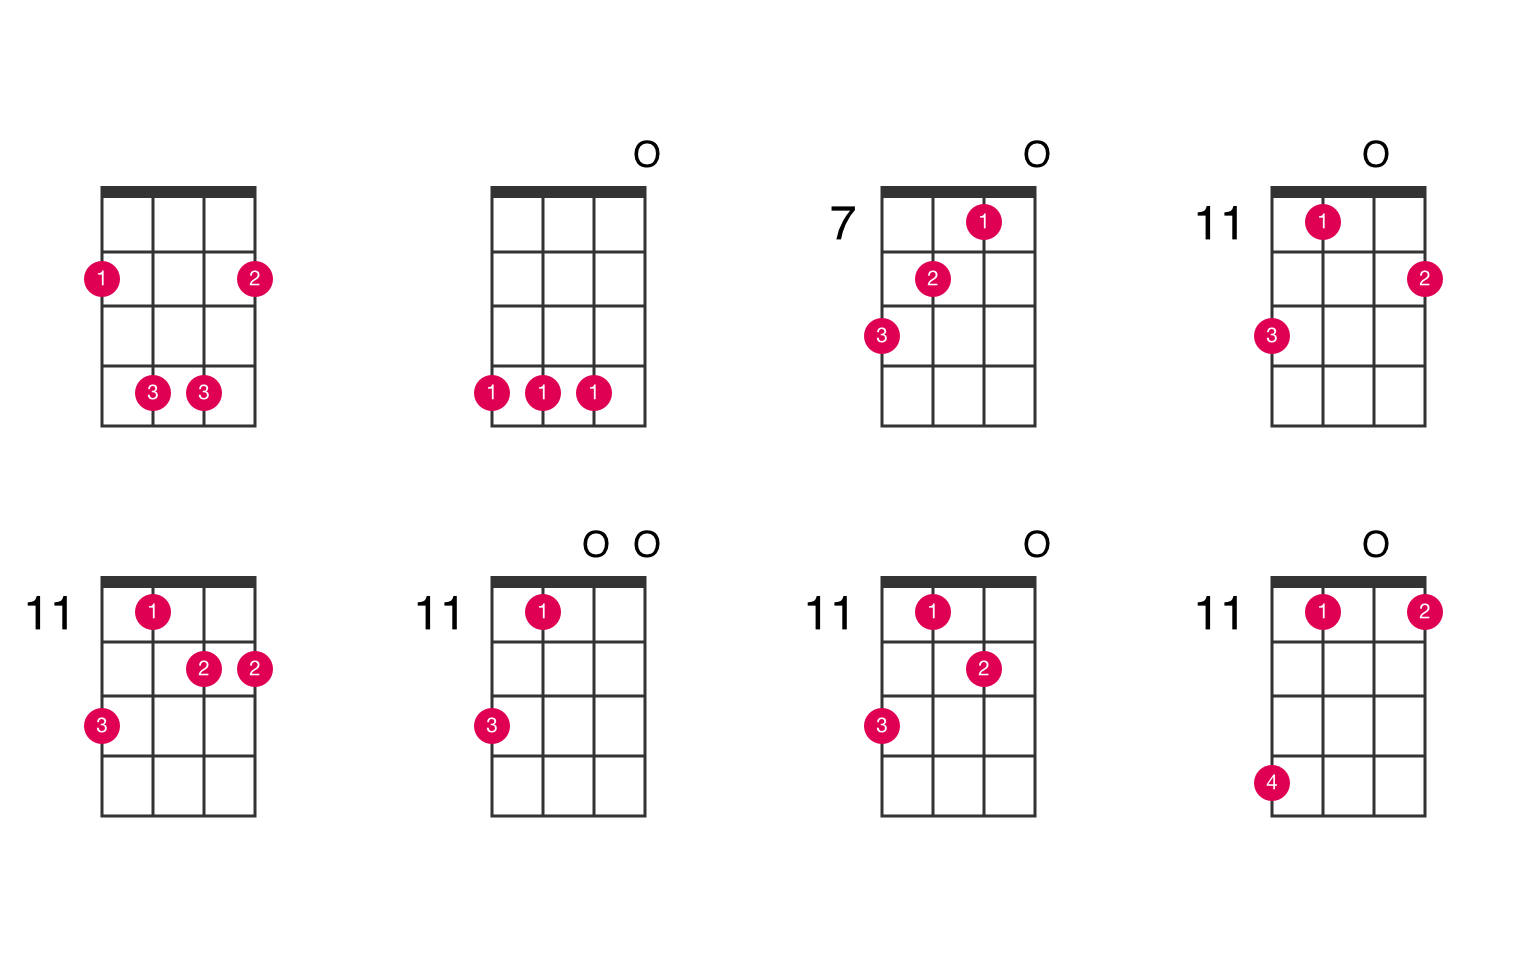 View ukulele chords chart for Amaj7sus2 chord along with suggested finger p...